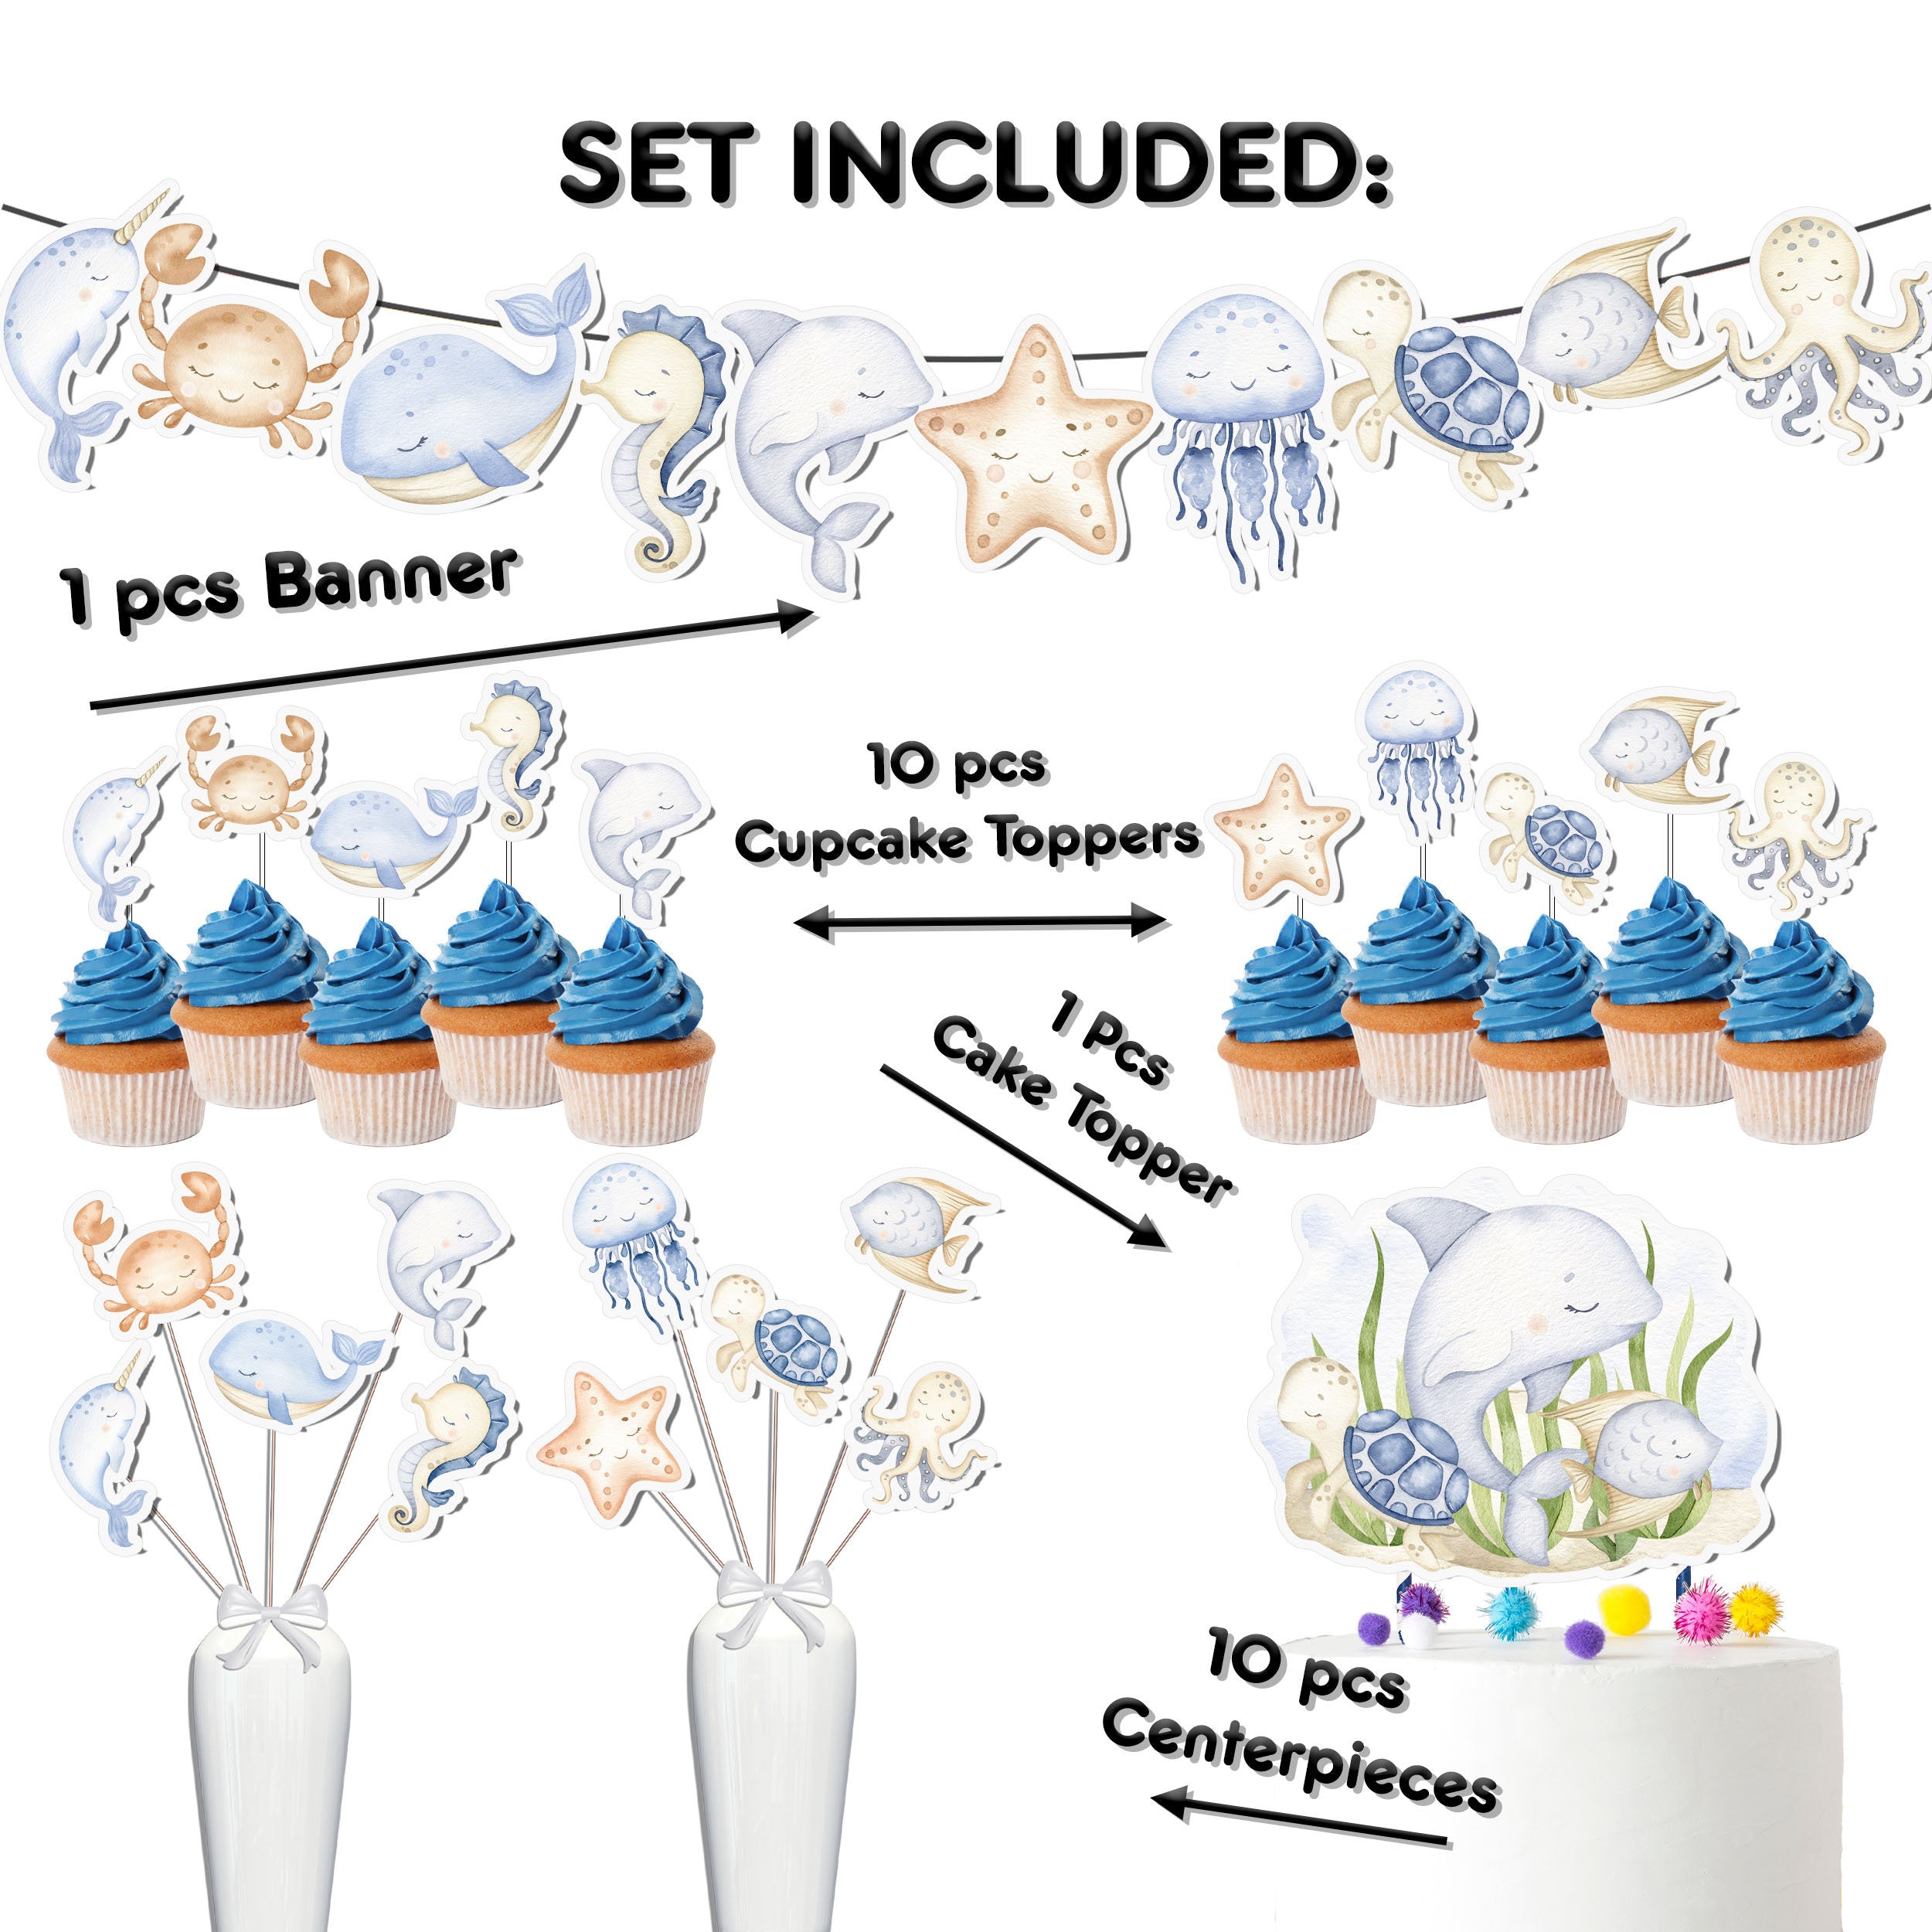 Dive Into Fun with Under-the-Sea Party Decor Set - Banner, Cake & Cupcake Toppers, Centerpieces for Birthday & Baby Shower